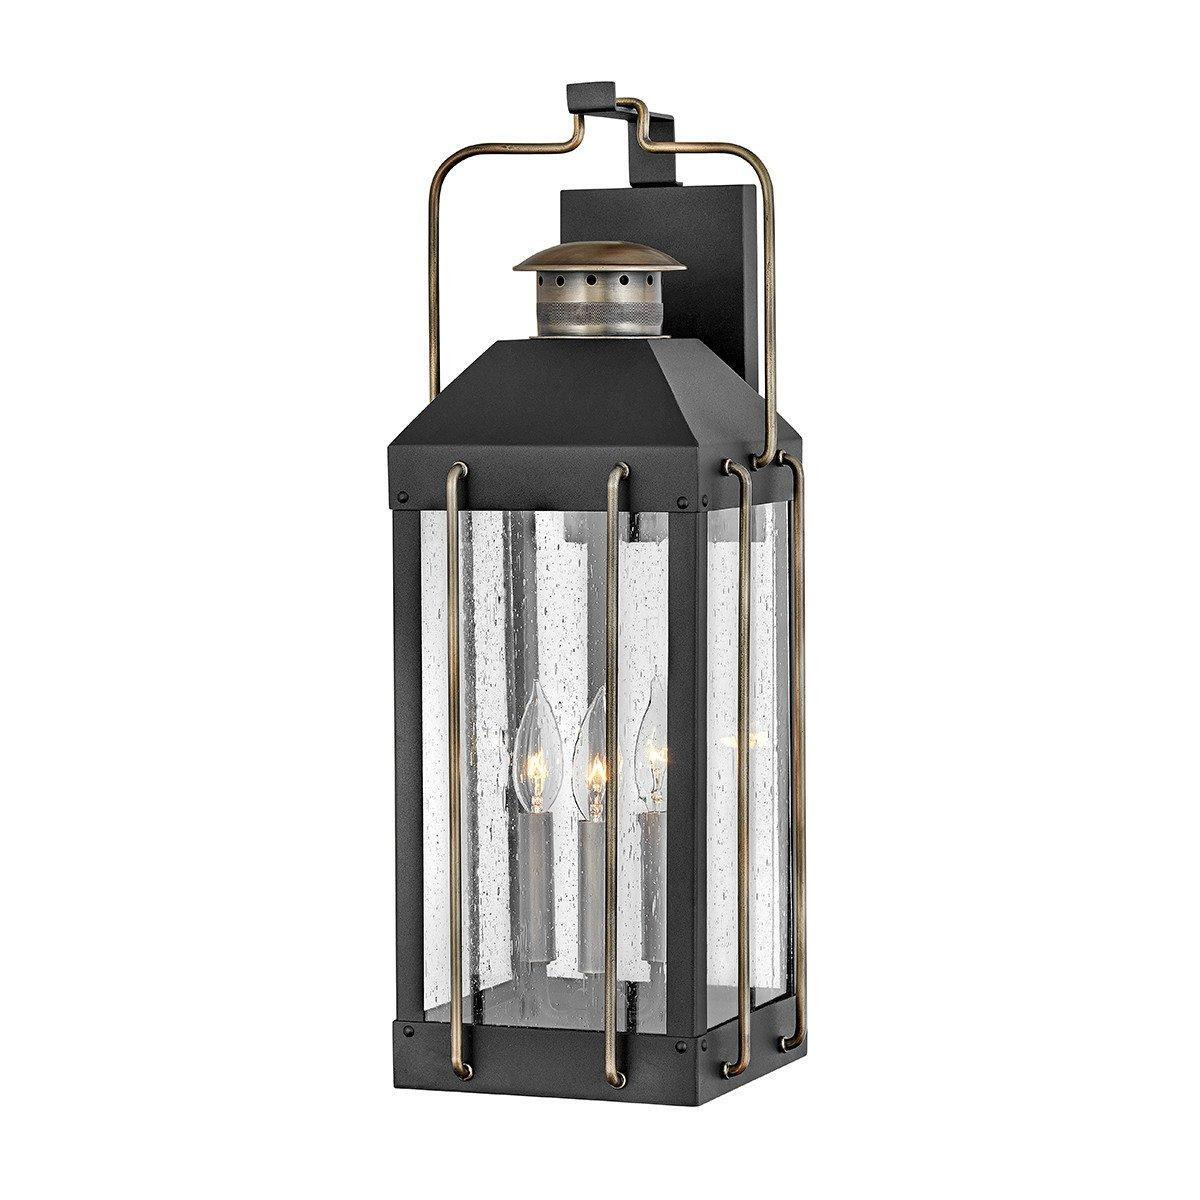 Hinkley Fitzgerald Outdoor Wall Lantern Textured Black with Burnished Bronze IP44 - image 1